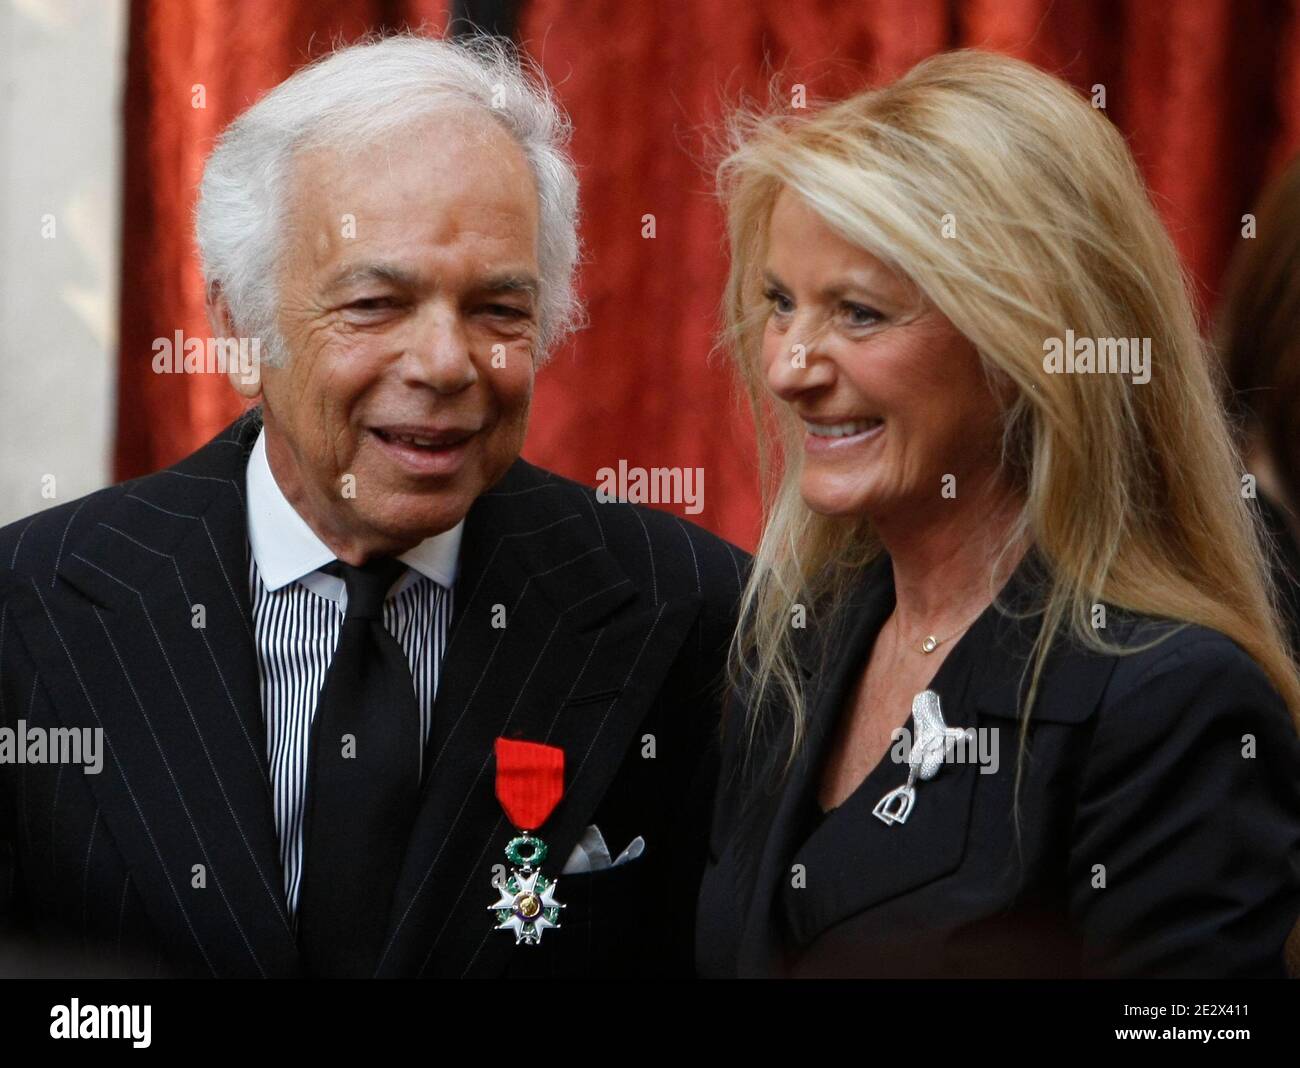 U.S. fashion designer Ralph Lauren, left, poses with his wife Ricky after  being awarded Chevalier of the Legion of Honor, one of France's most  prestigious distinctions, by French President Nicolas Sarkozy, unseen,